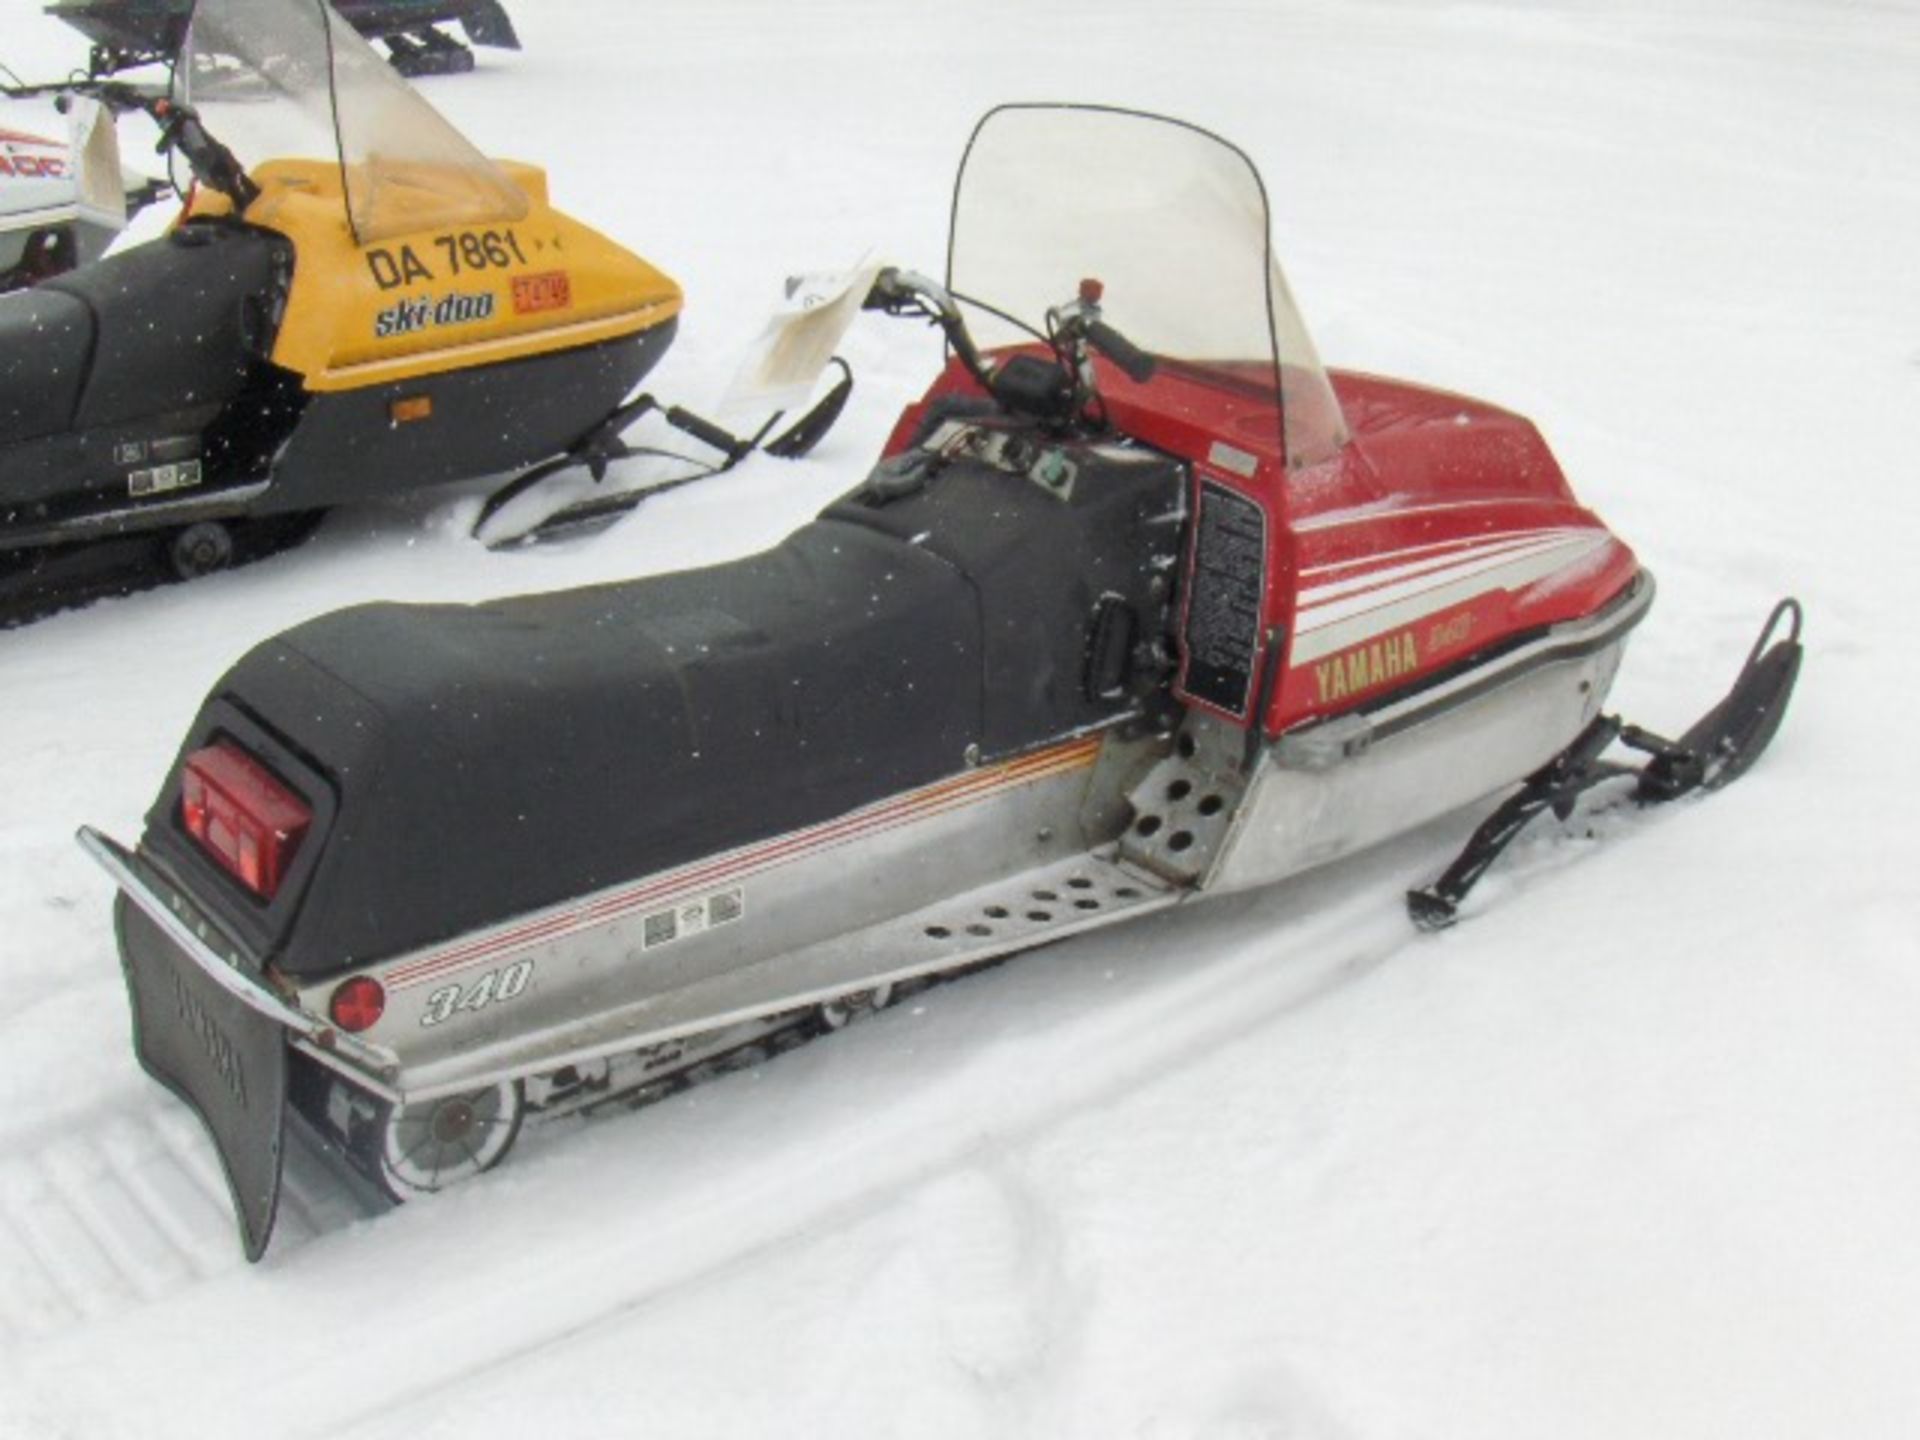 1979 YAMAHA 340 ENTICER  8H5014019 snowmobile, owner started at time of auction check in, new - Image 3 of 3